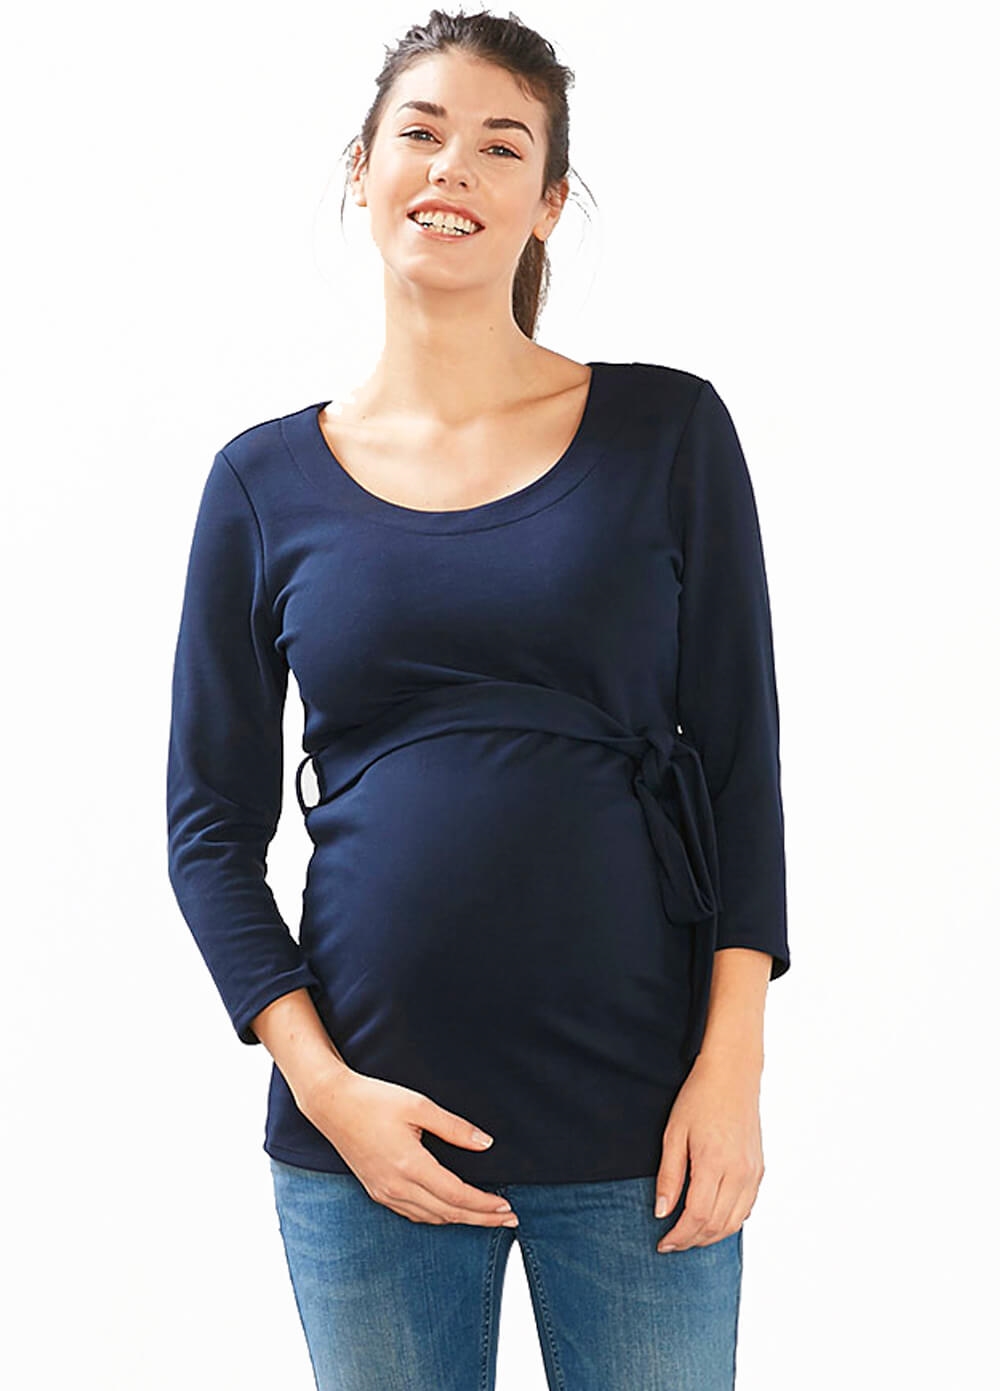 Belted Maternity Top in Night Blue by Esprit